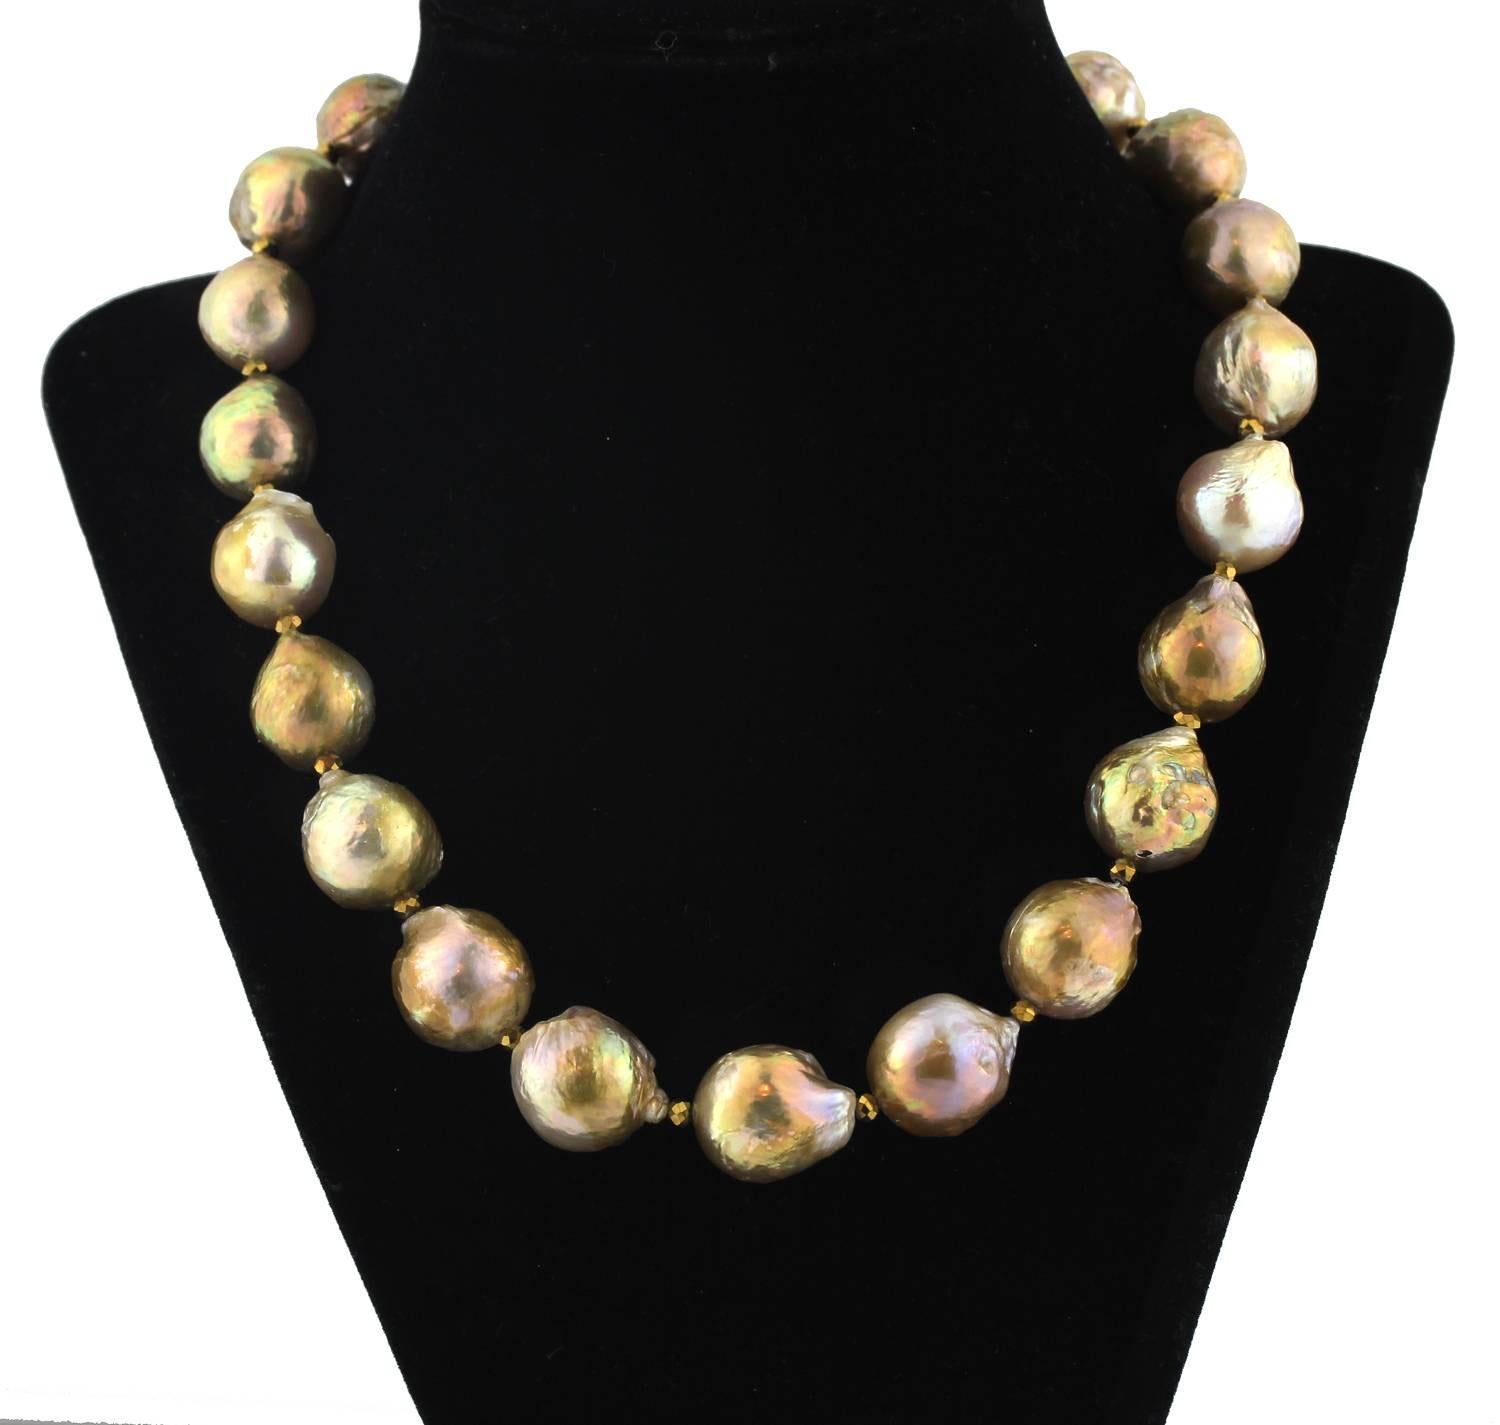 These unique imperfect natural wrinkle Pearls glow mostly brilliant golden with some slight pinky/red tones in different lights on this handmade necklace.  Size:  graduated up to 16 mm;  Length:  18.5 inches
Clasp:  gold plated.  